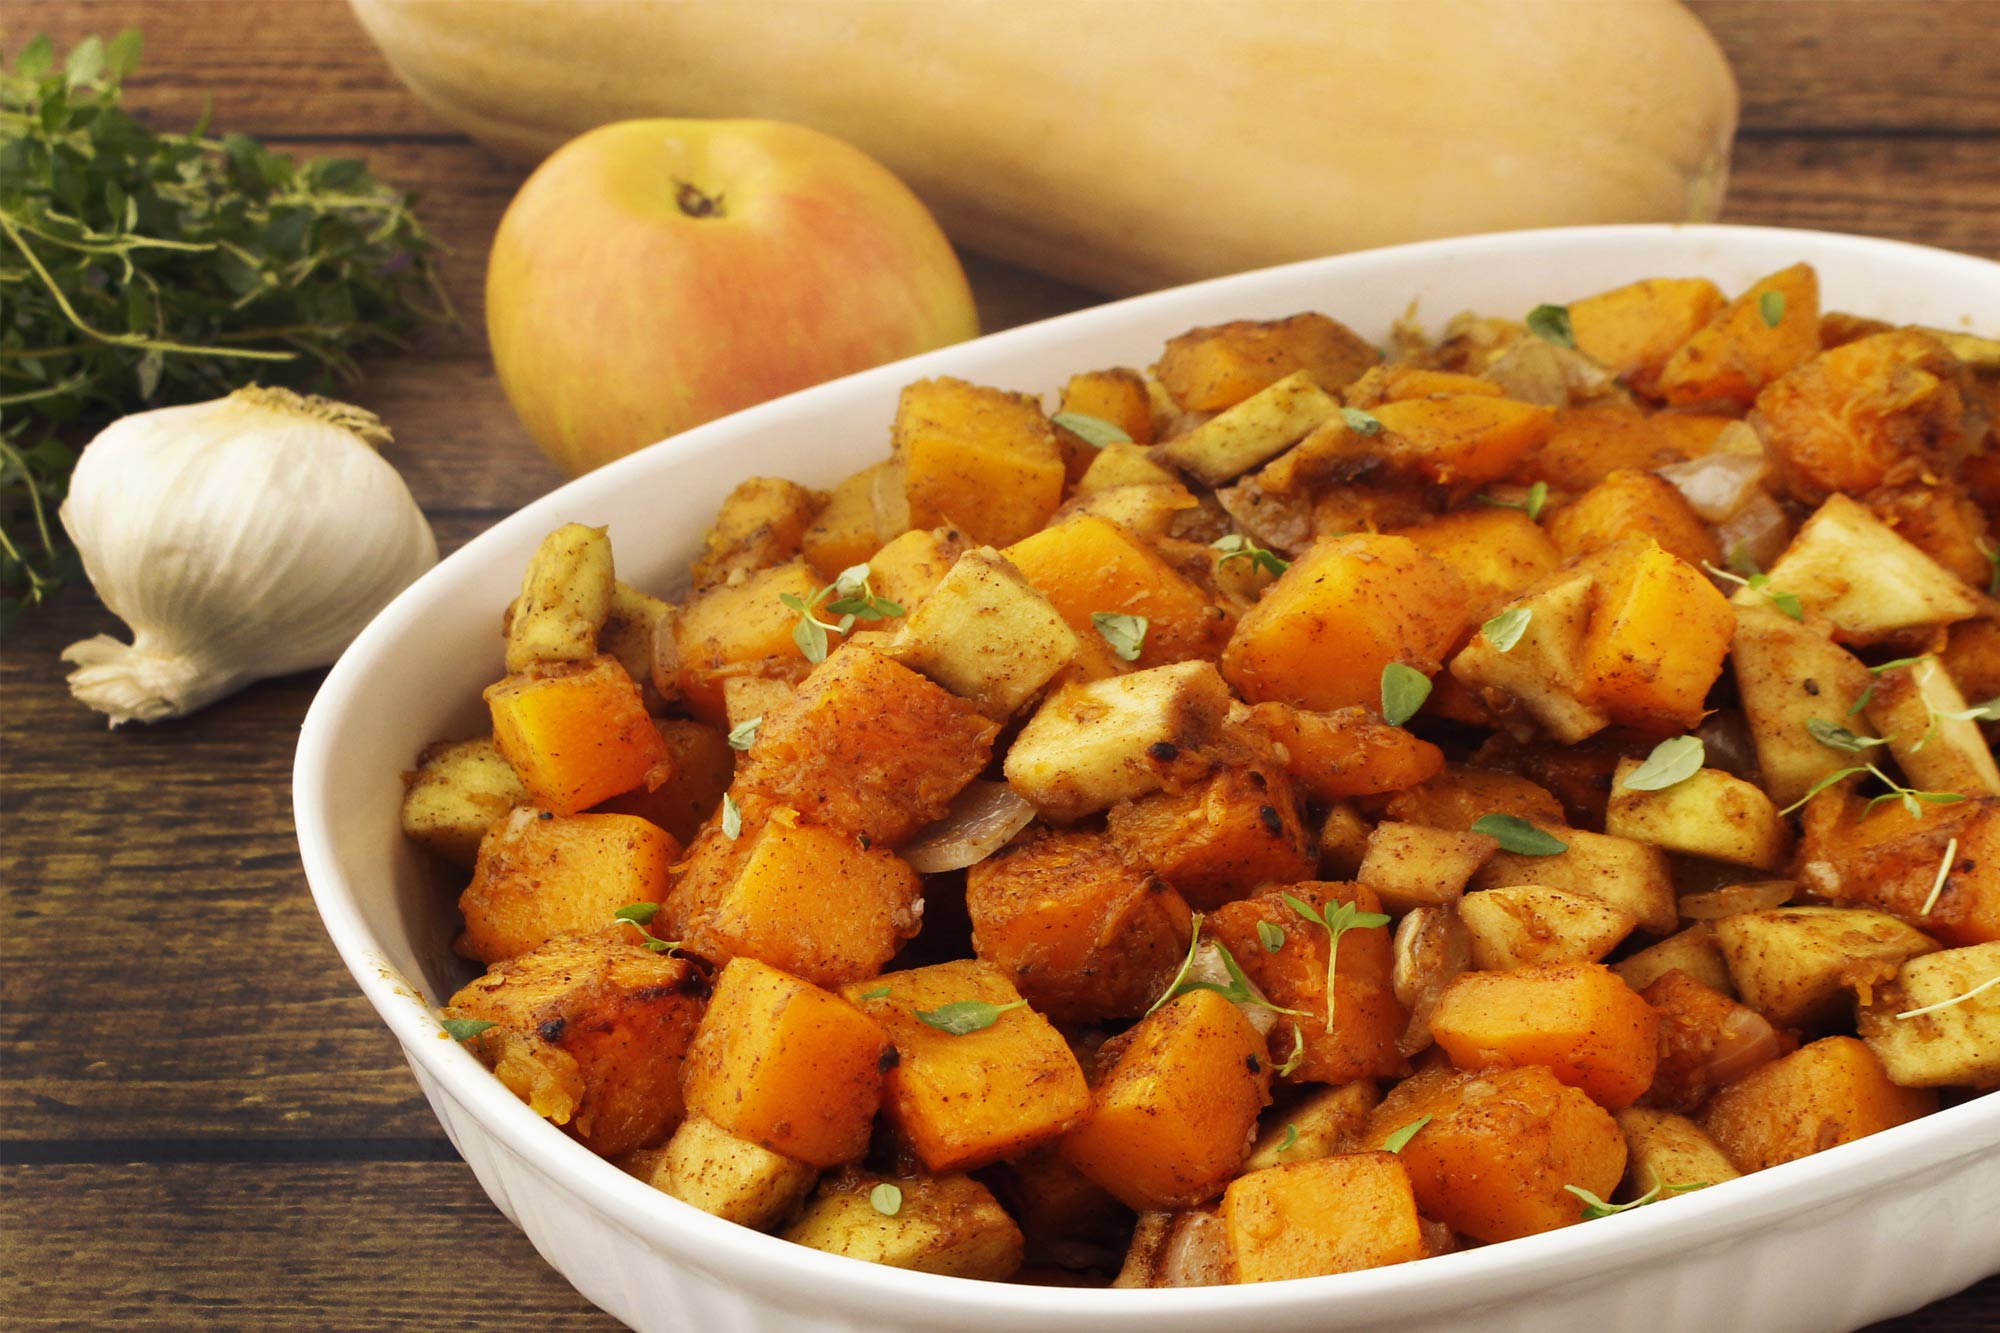  Roasted Butternut Squash and Apple Casserole 